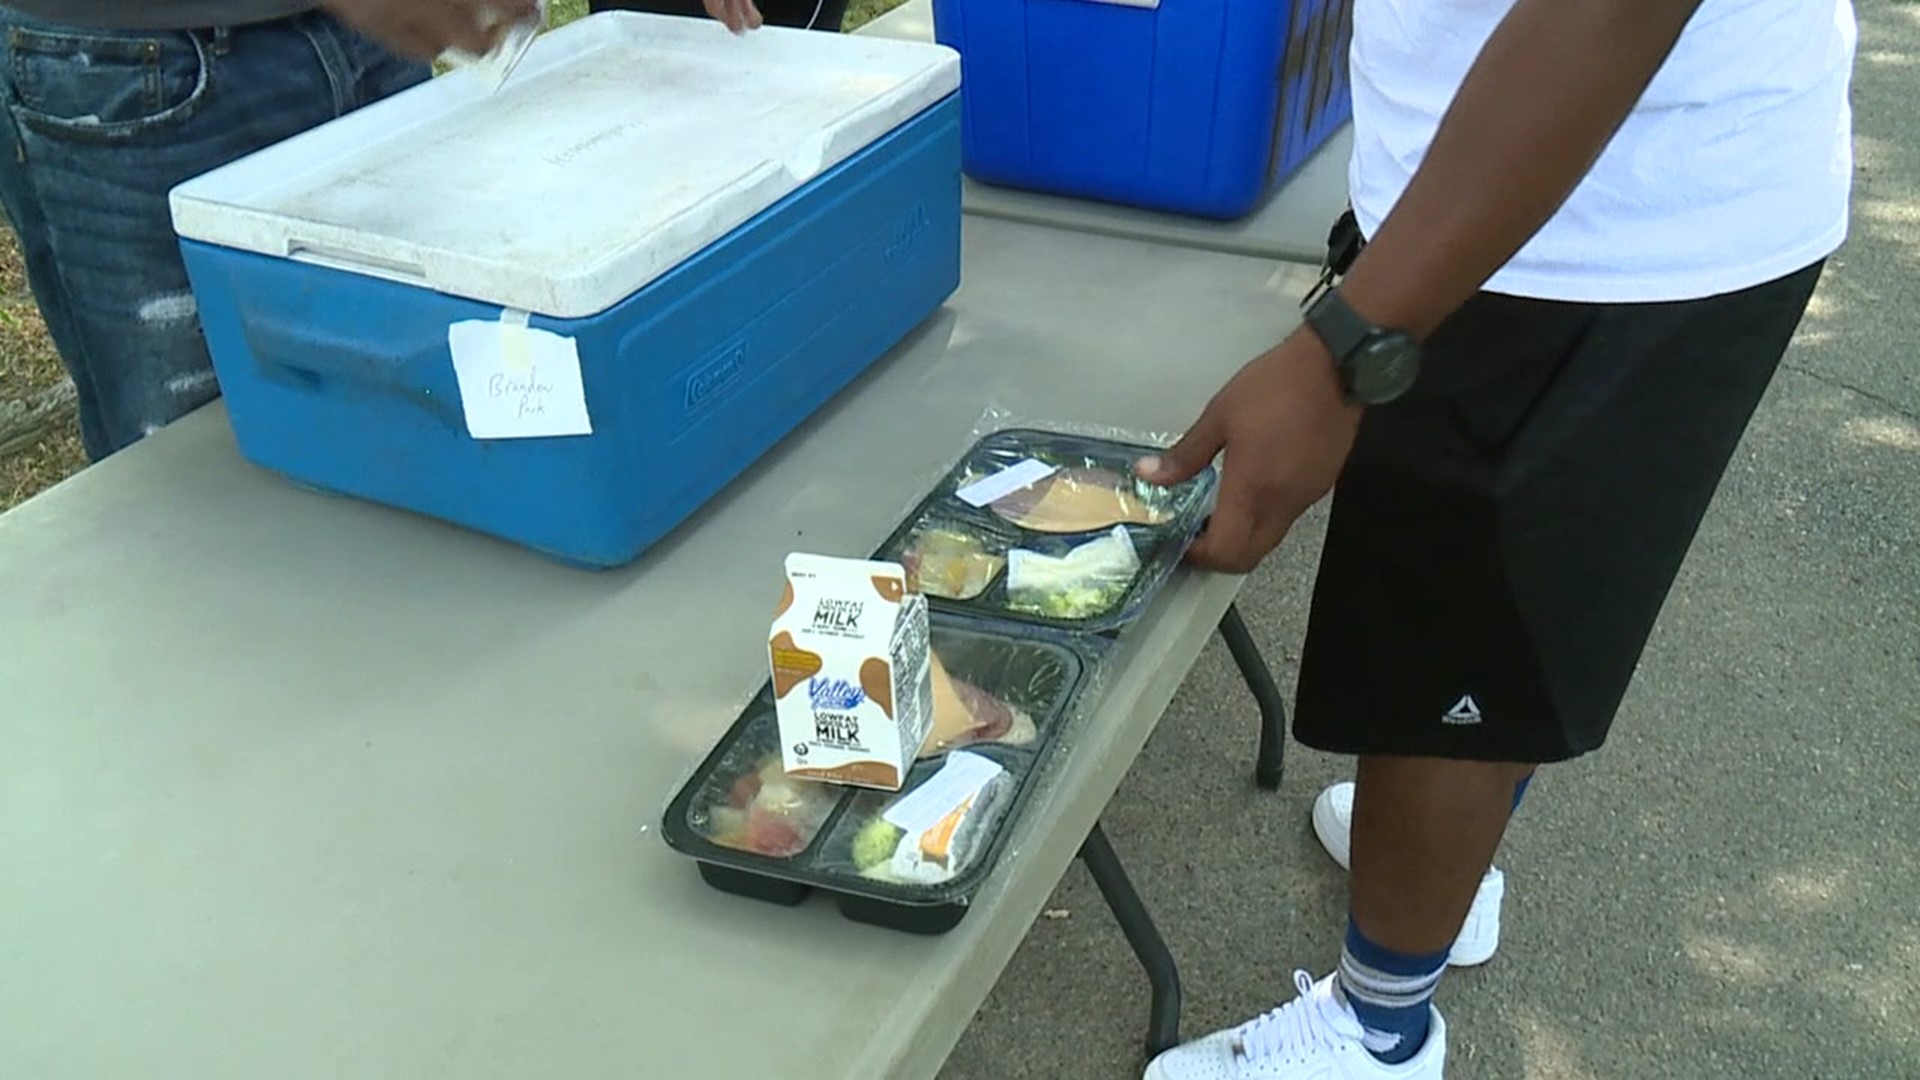 Williamsport wants to make sure children are not going hungry this summer, so even during the pandemic, the city is giving kids free meals during the summer months.